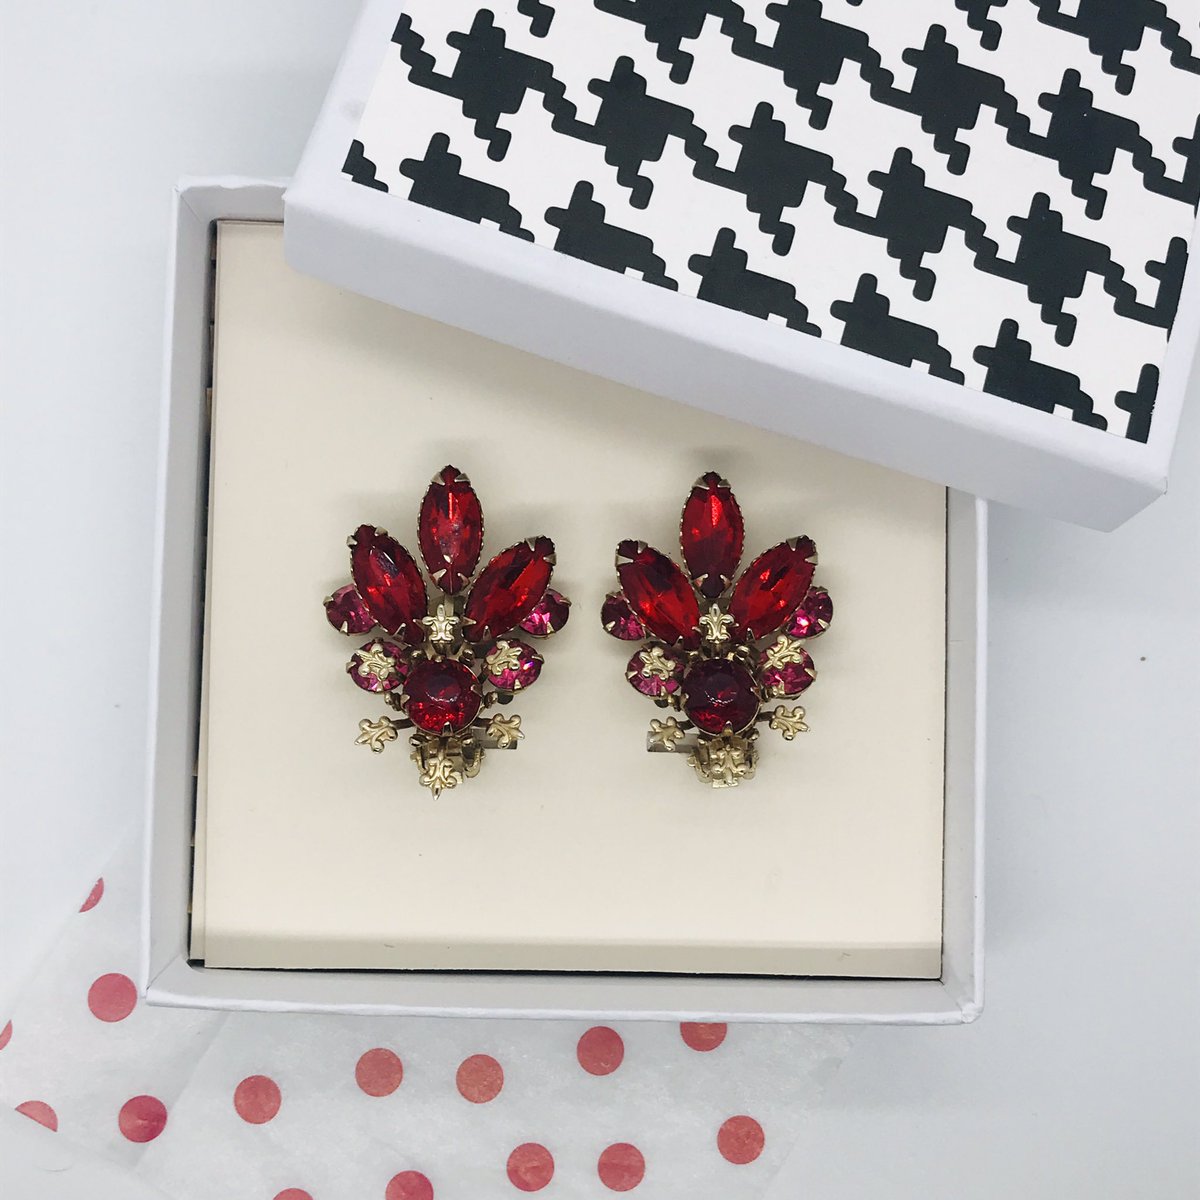 Thank you for the support… sending a lovely pair of red vintage clip earrings to France today 🇫🇷 #etsyseller #estygifts #vintageearrings #retro #giftsforher #craftbizhour